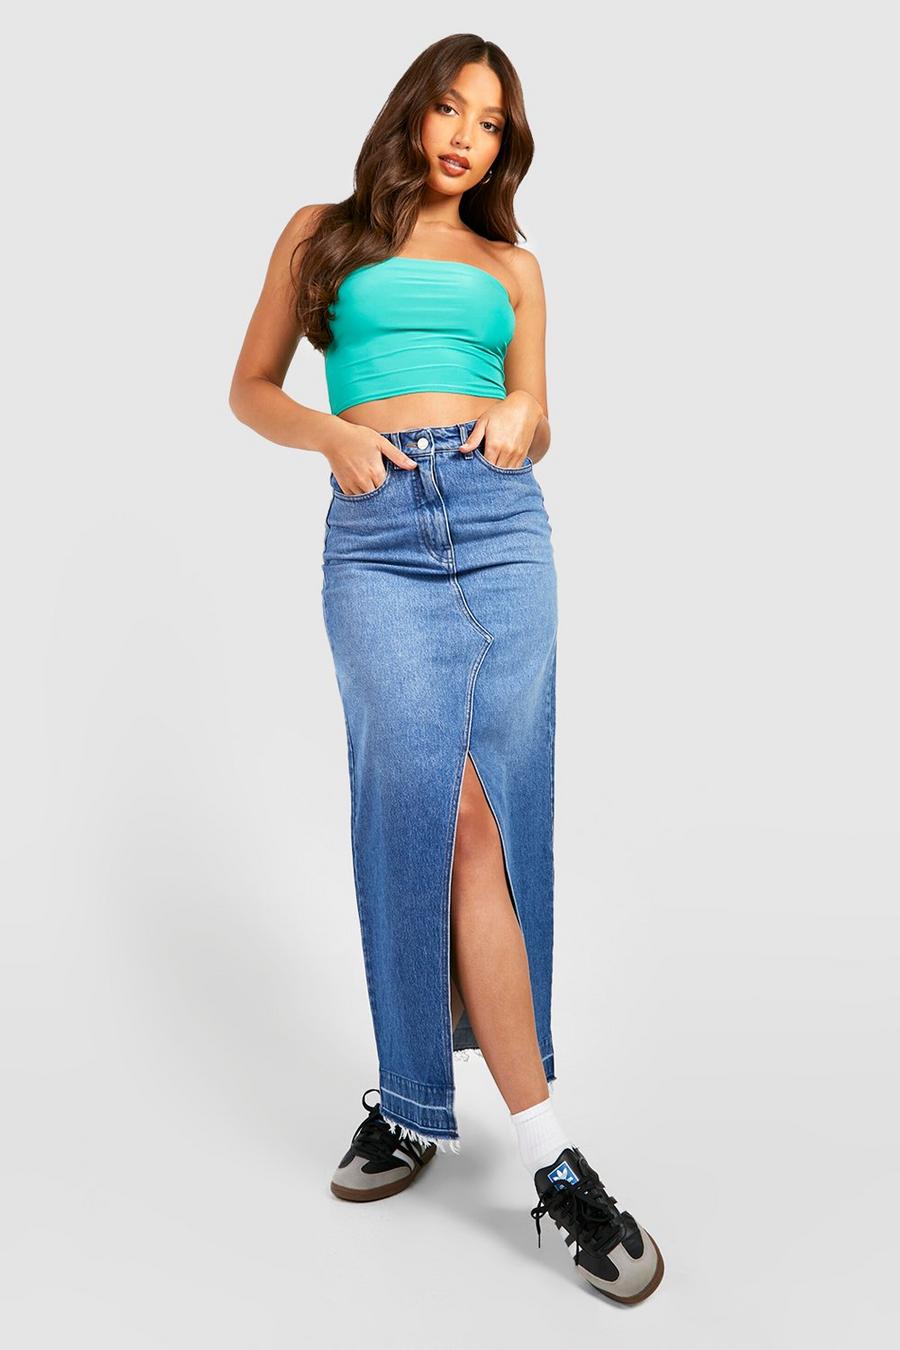 Turquoise Tall Glansig bandeau crop top image number 1